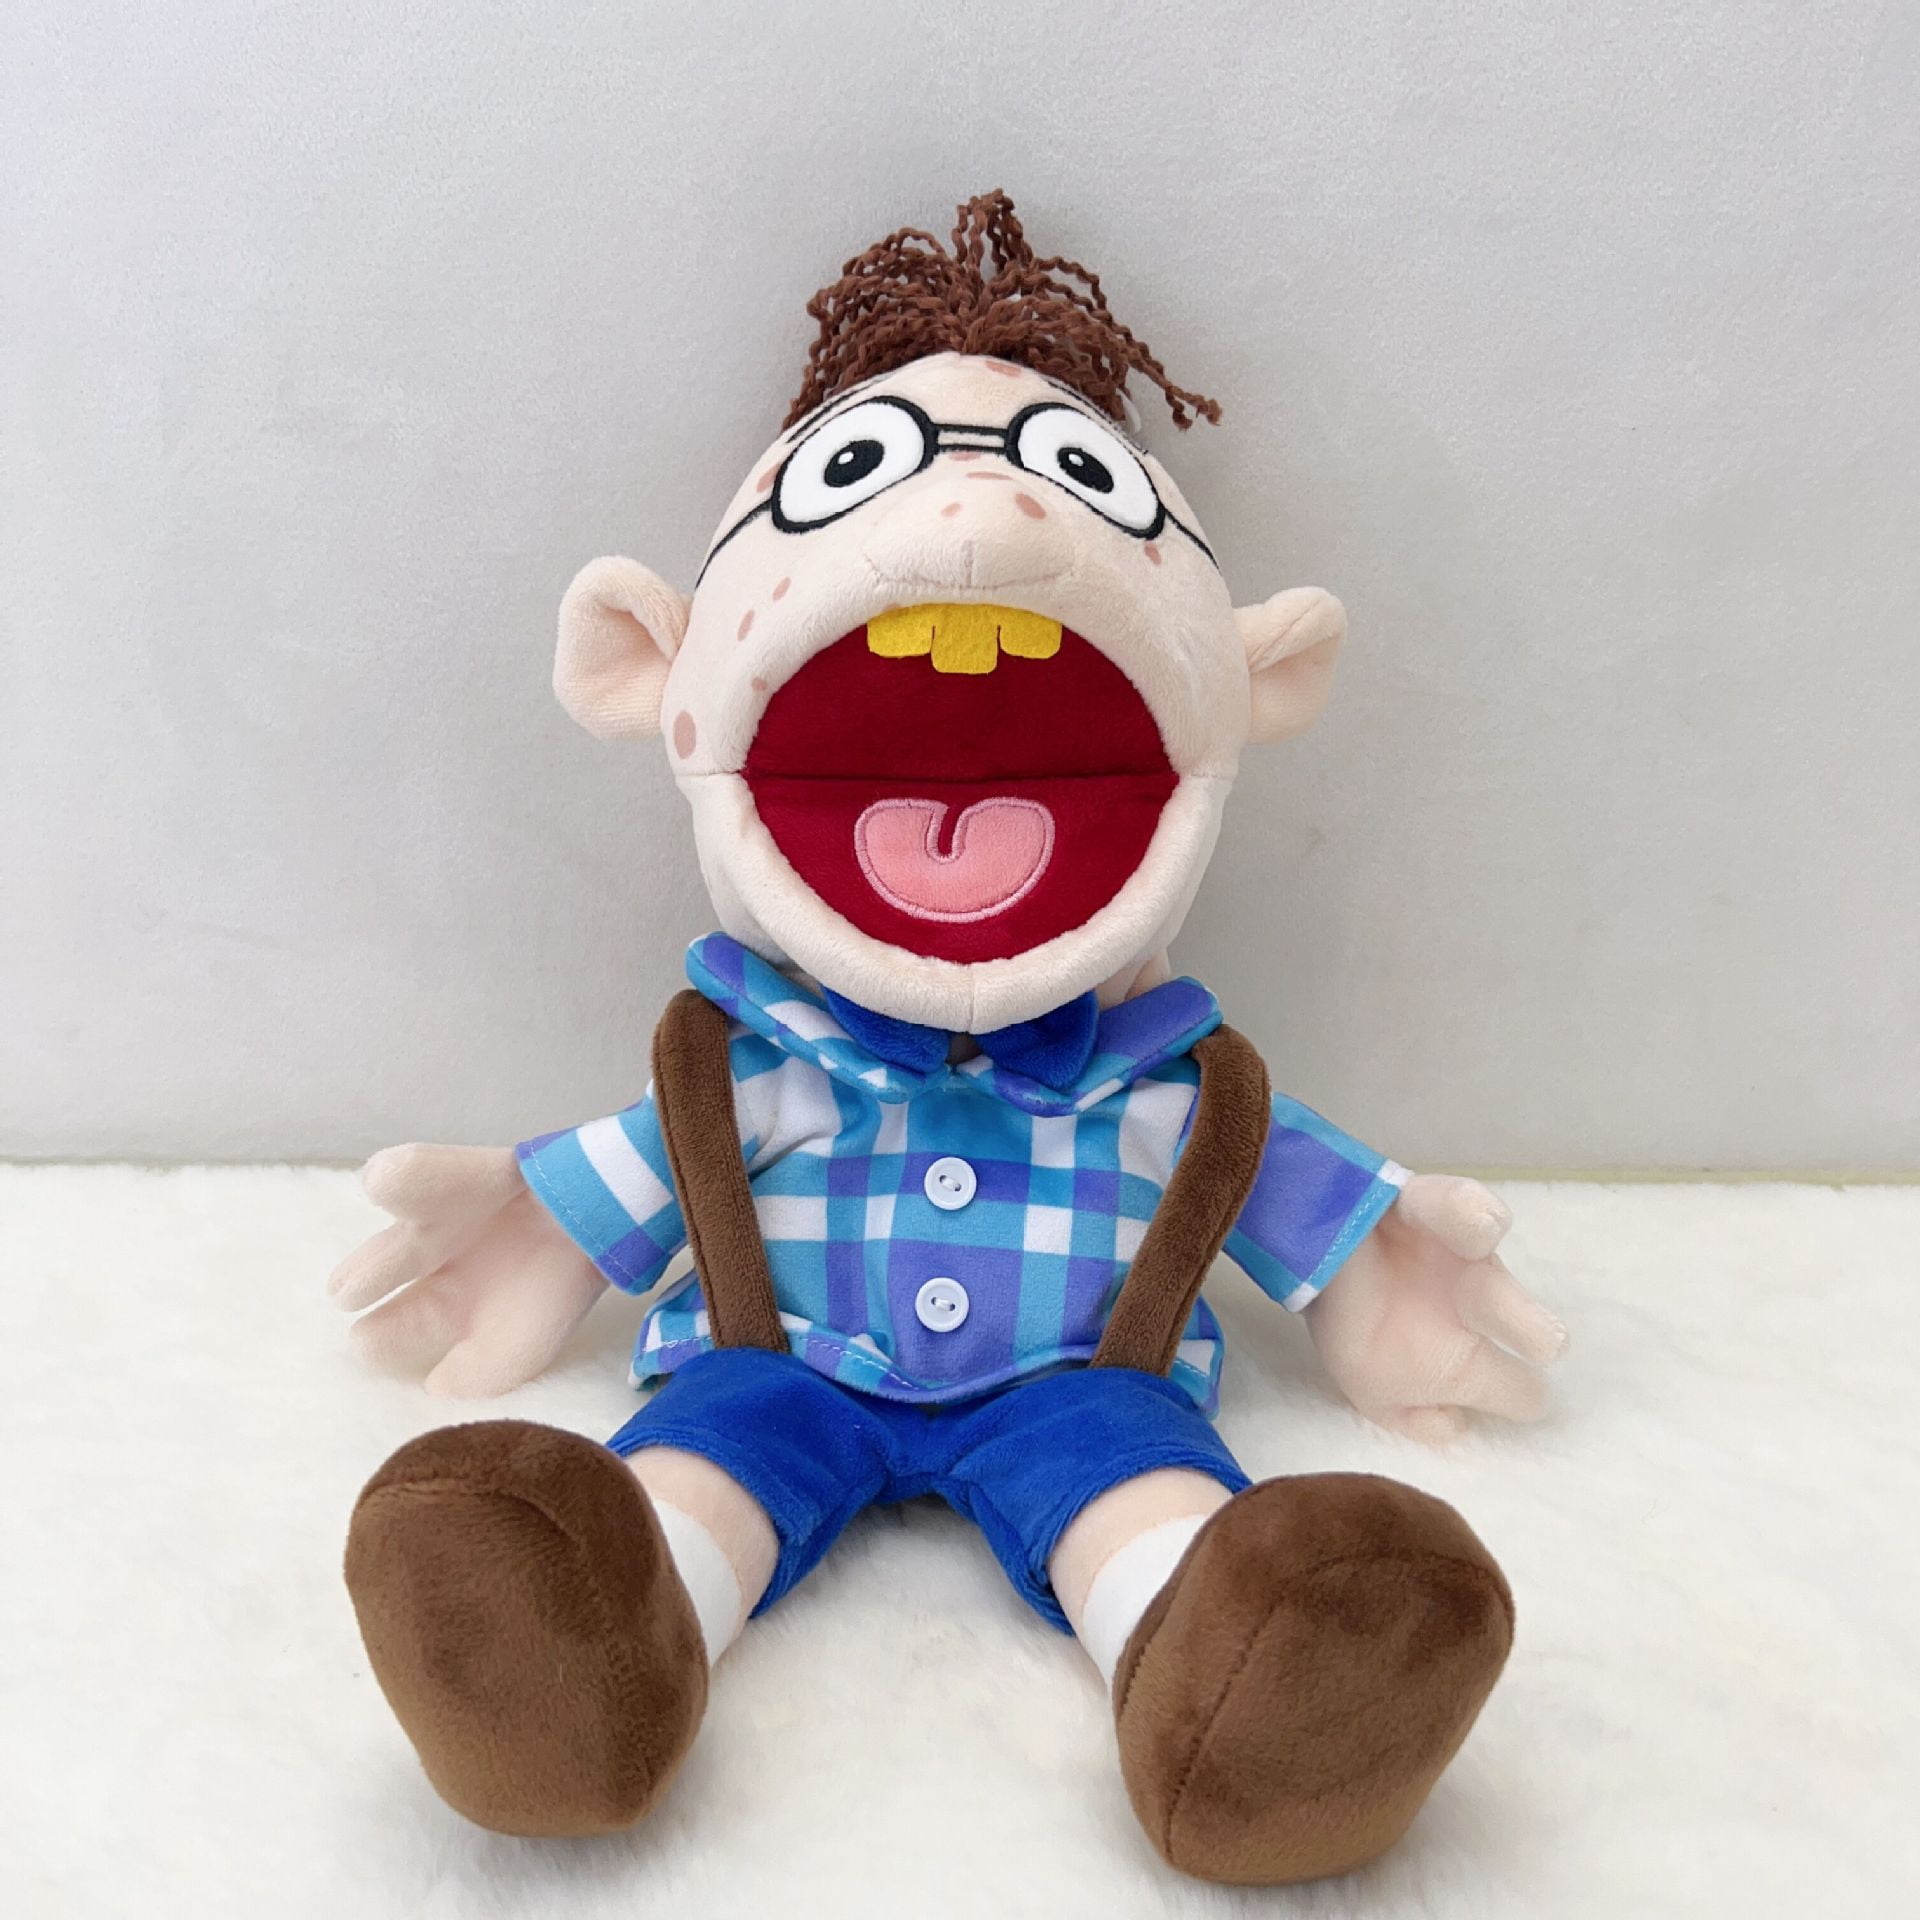 Jeffy Puppet Plush Toy Doll, Mischievous Funny Puppets Toy With Working  Mouth, Soft Stuffed Hand Puppet Prank Plush Toy, Silly Ventriloquist Hand  Puppets For Kids Party Favors Gift : : Jeux et